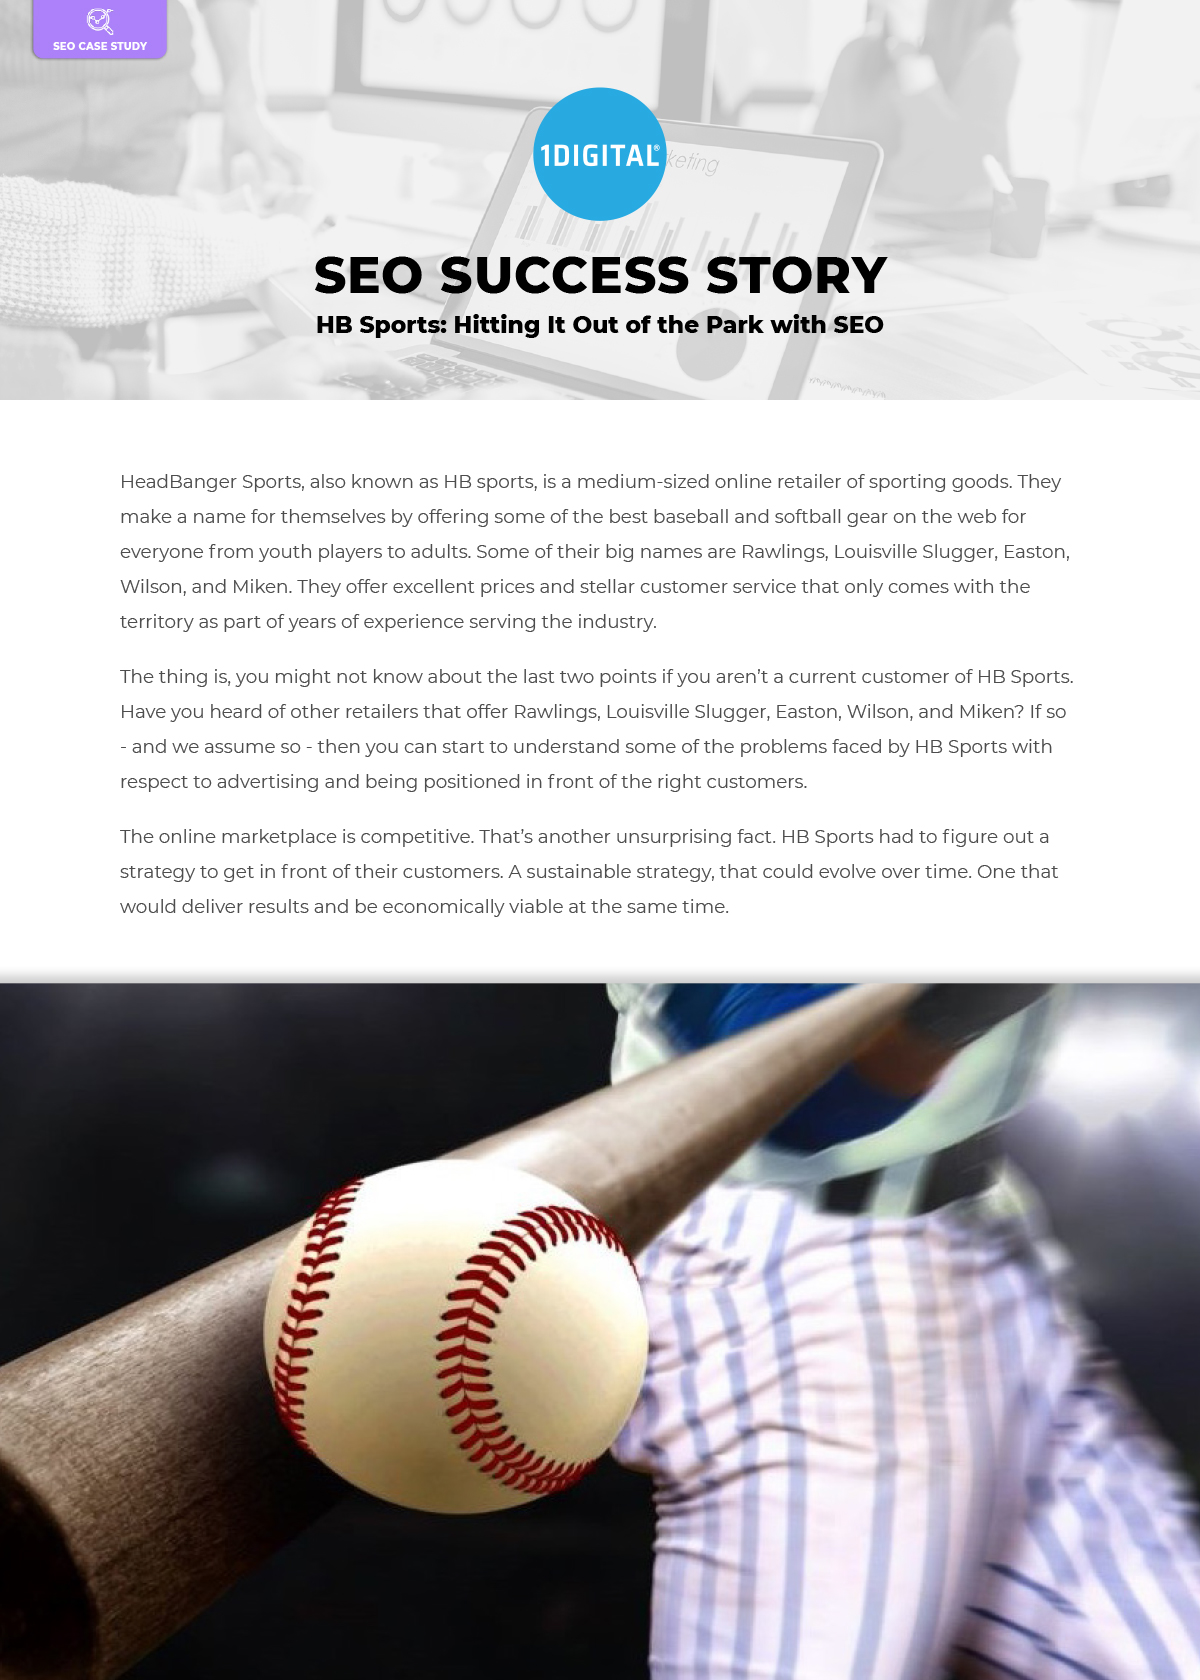 Hitting It Out of the Park with SEO